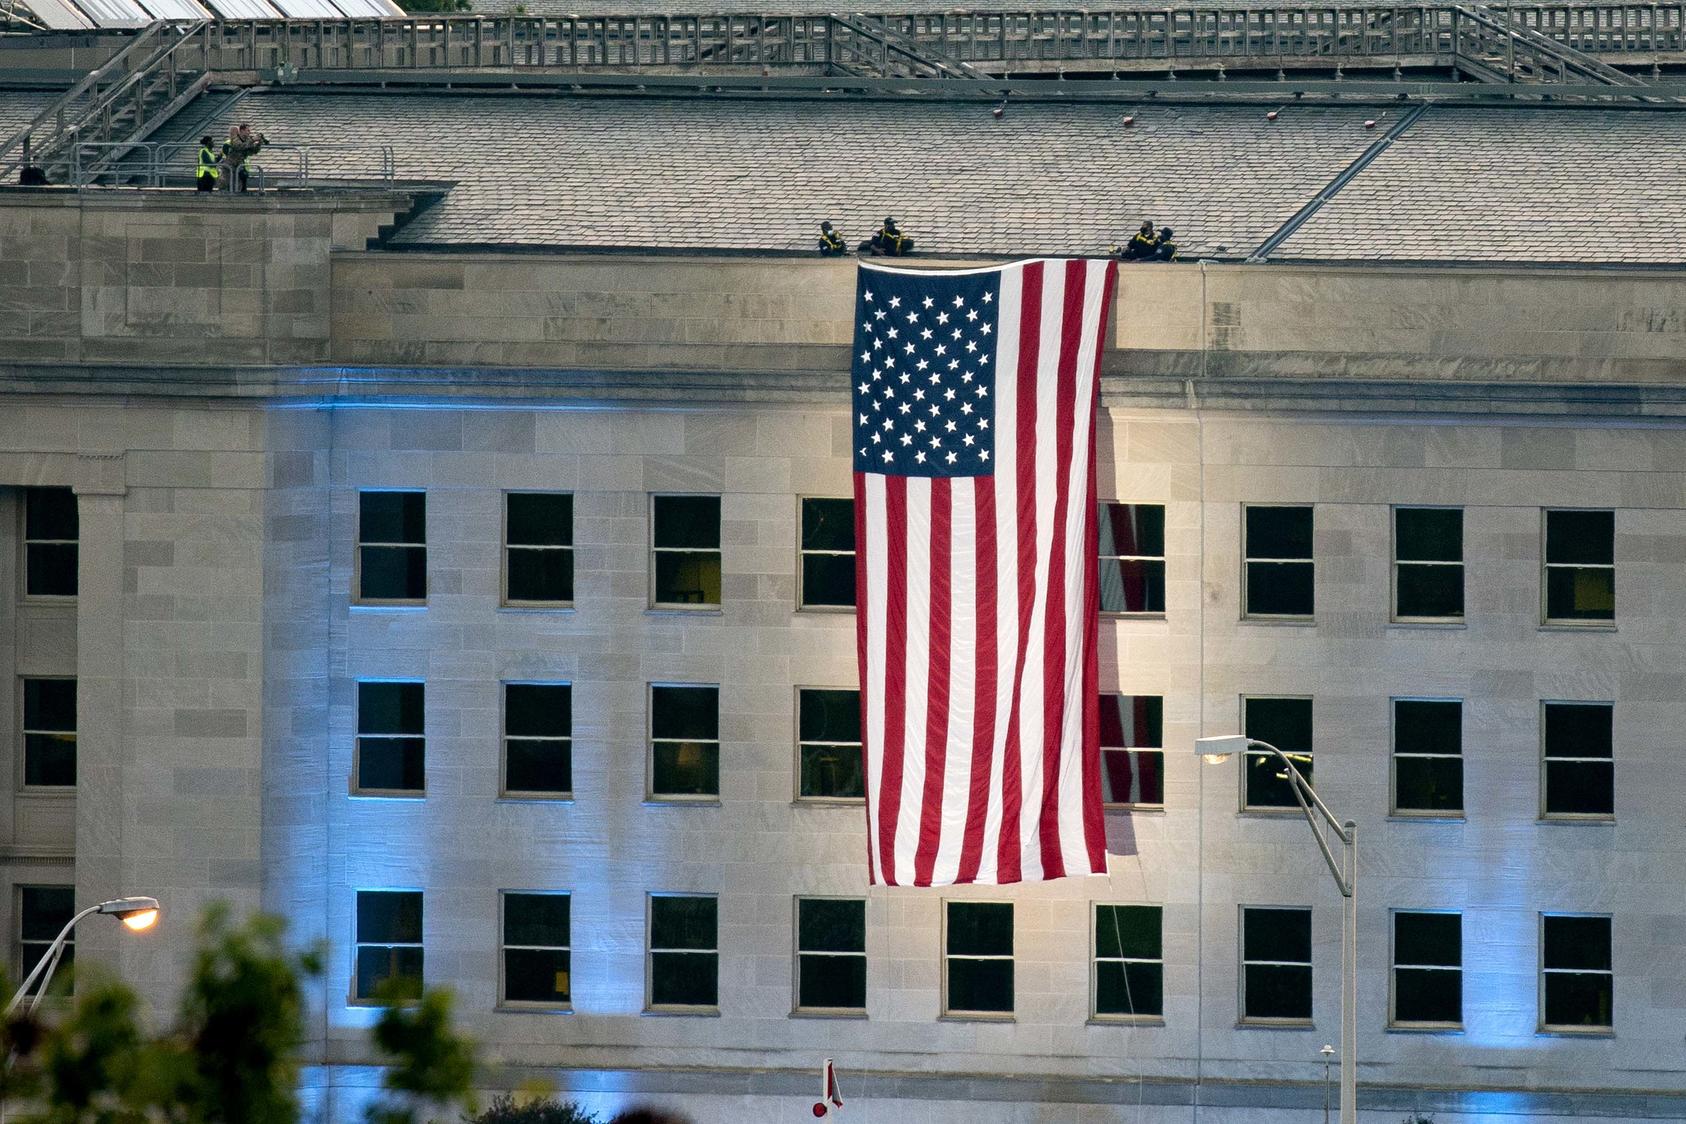 The American flag is unfurled at the site where a hijacked plane crashed into the Pentagon 20 years ago in Arlington, Virginia. September 11, 2021. (Stefani Reynolds/The New York Times)